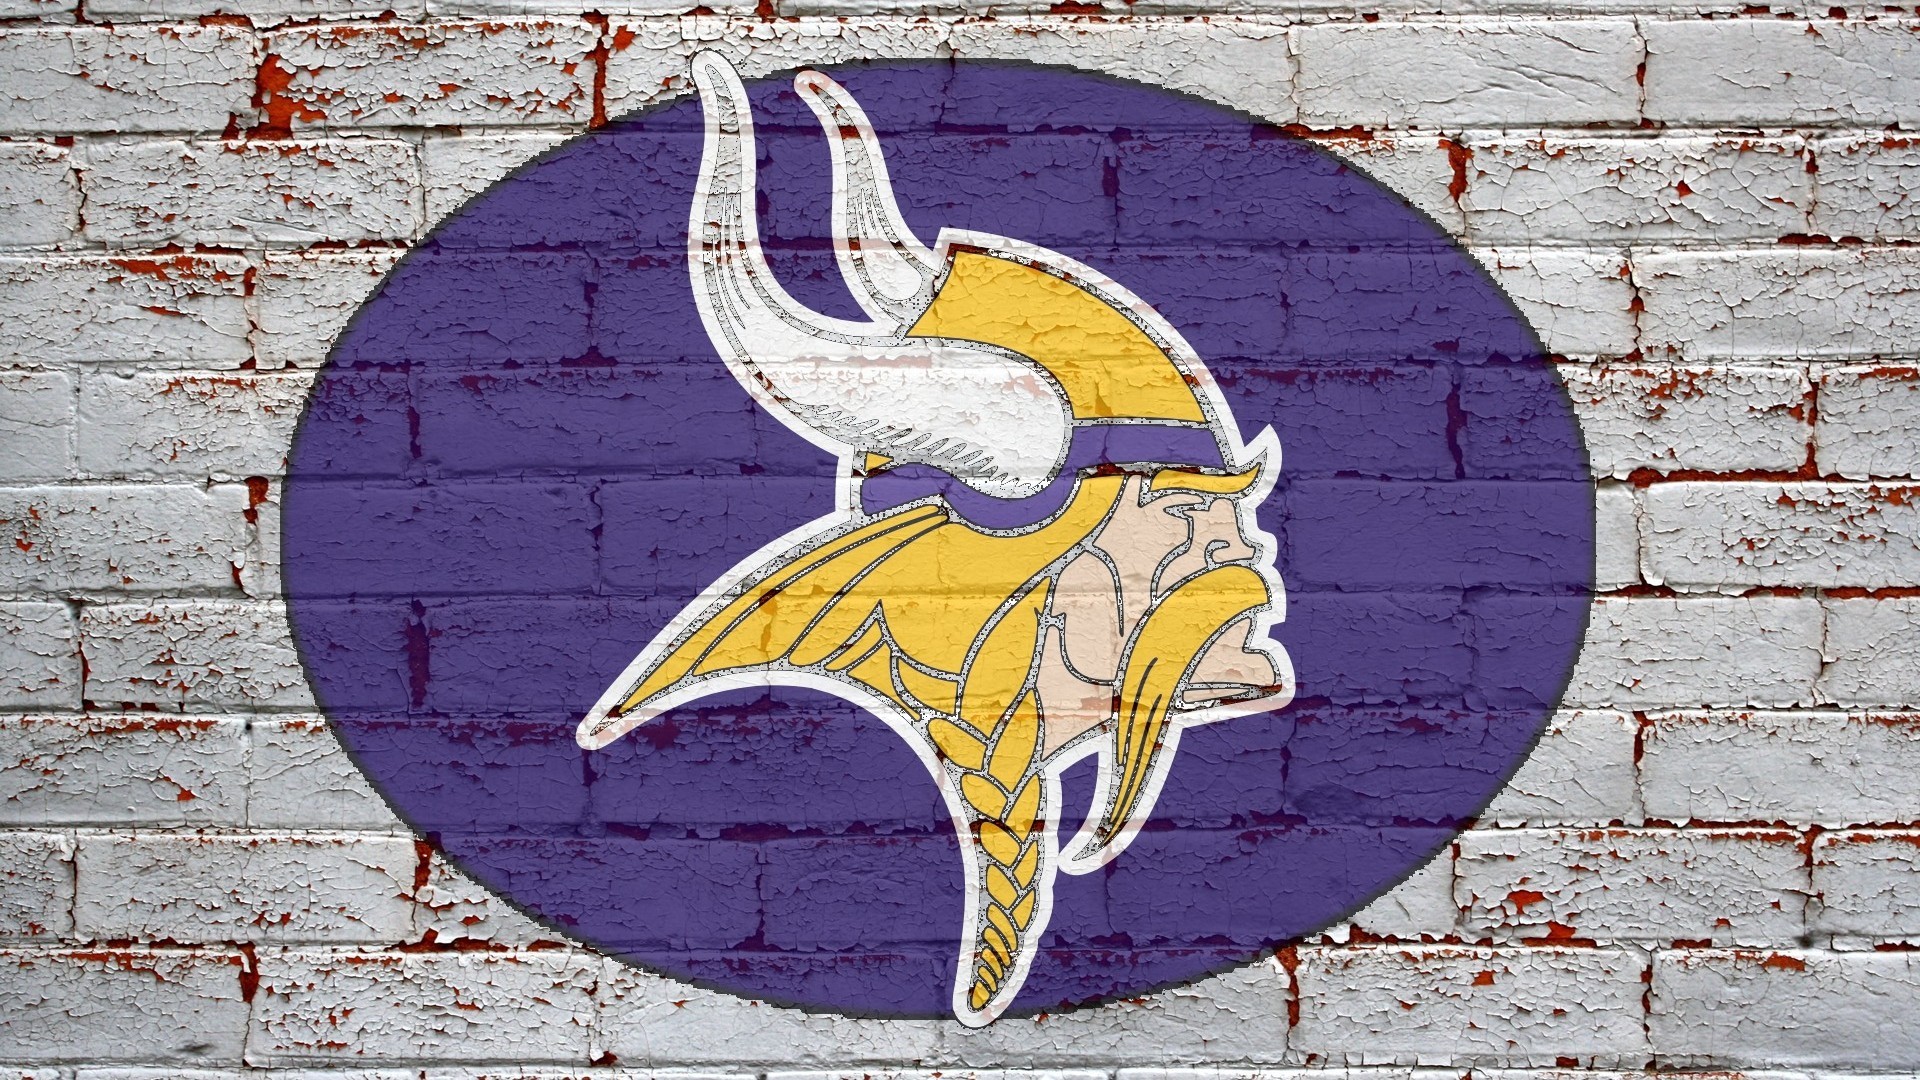 HD Desktop Wallpaper Minnesota Vikings NFL with high-resolution 1920x1080 pixel. You can use this wallpaper for your Mac or Windows Desktop Background, iPhone, Android or Tablet and another Smartphone device